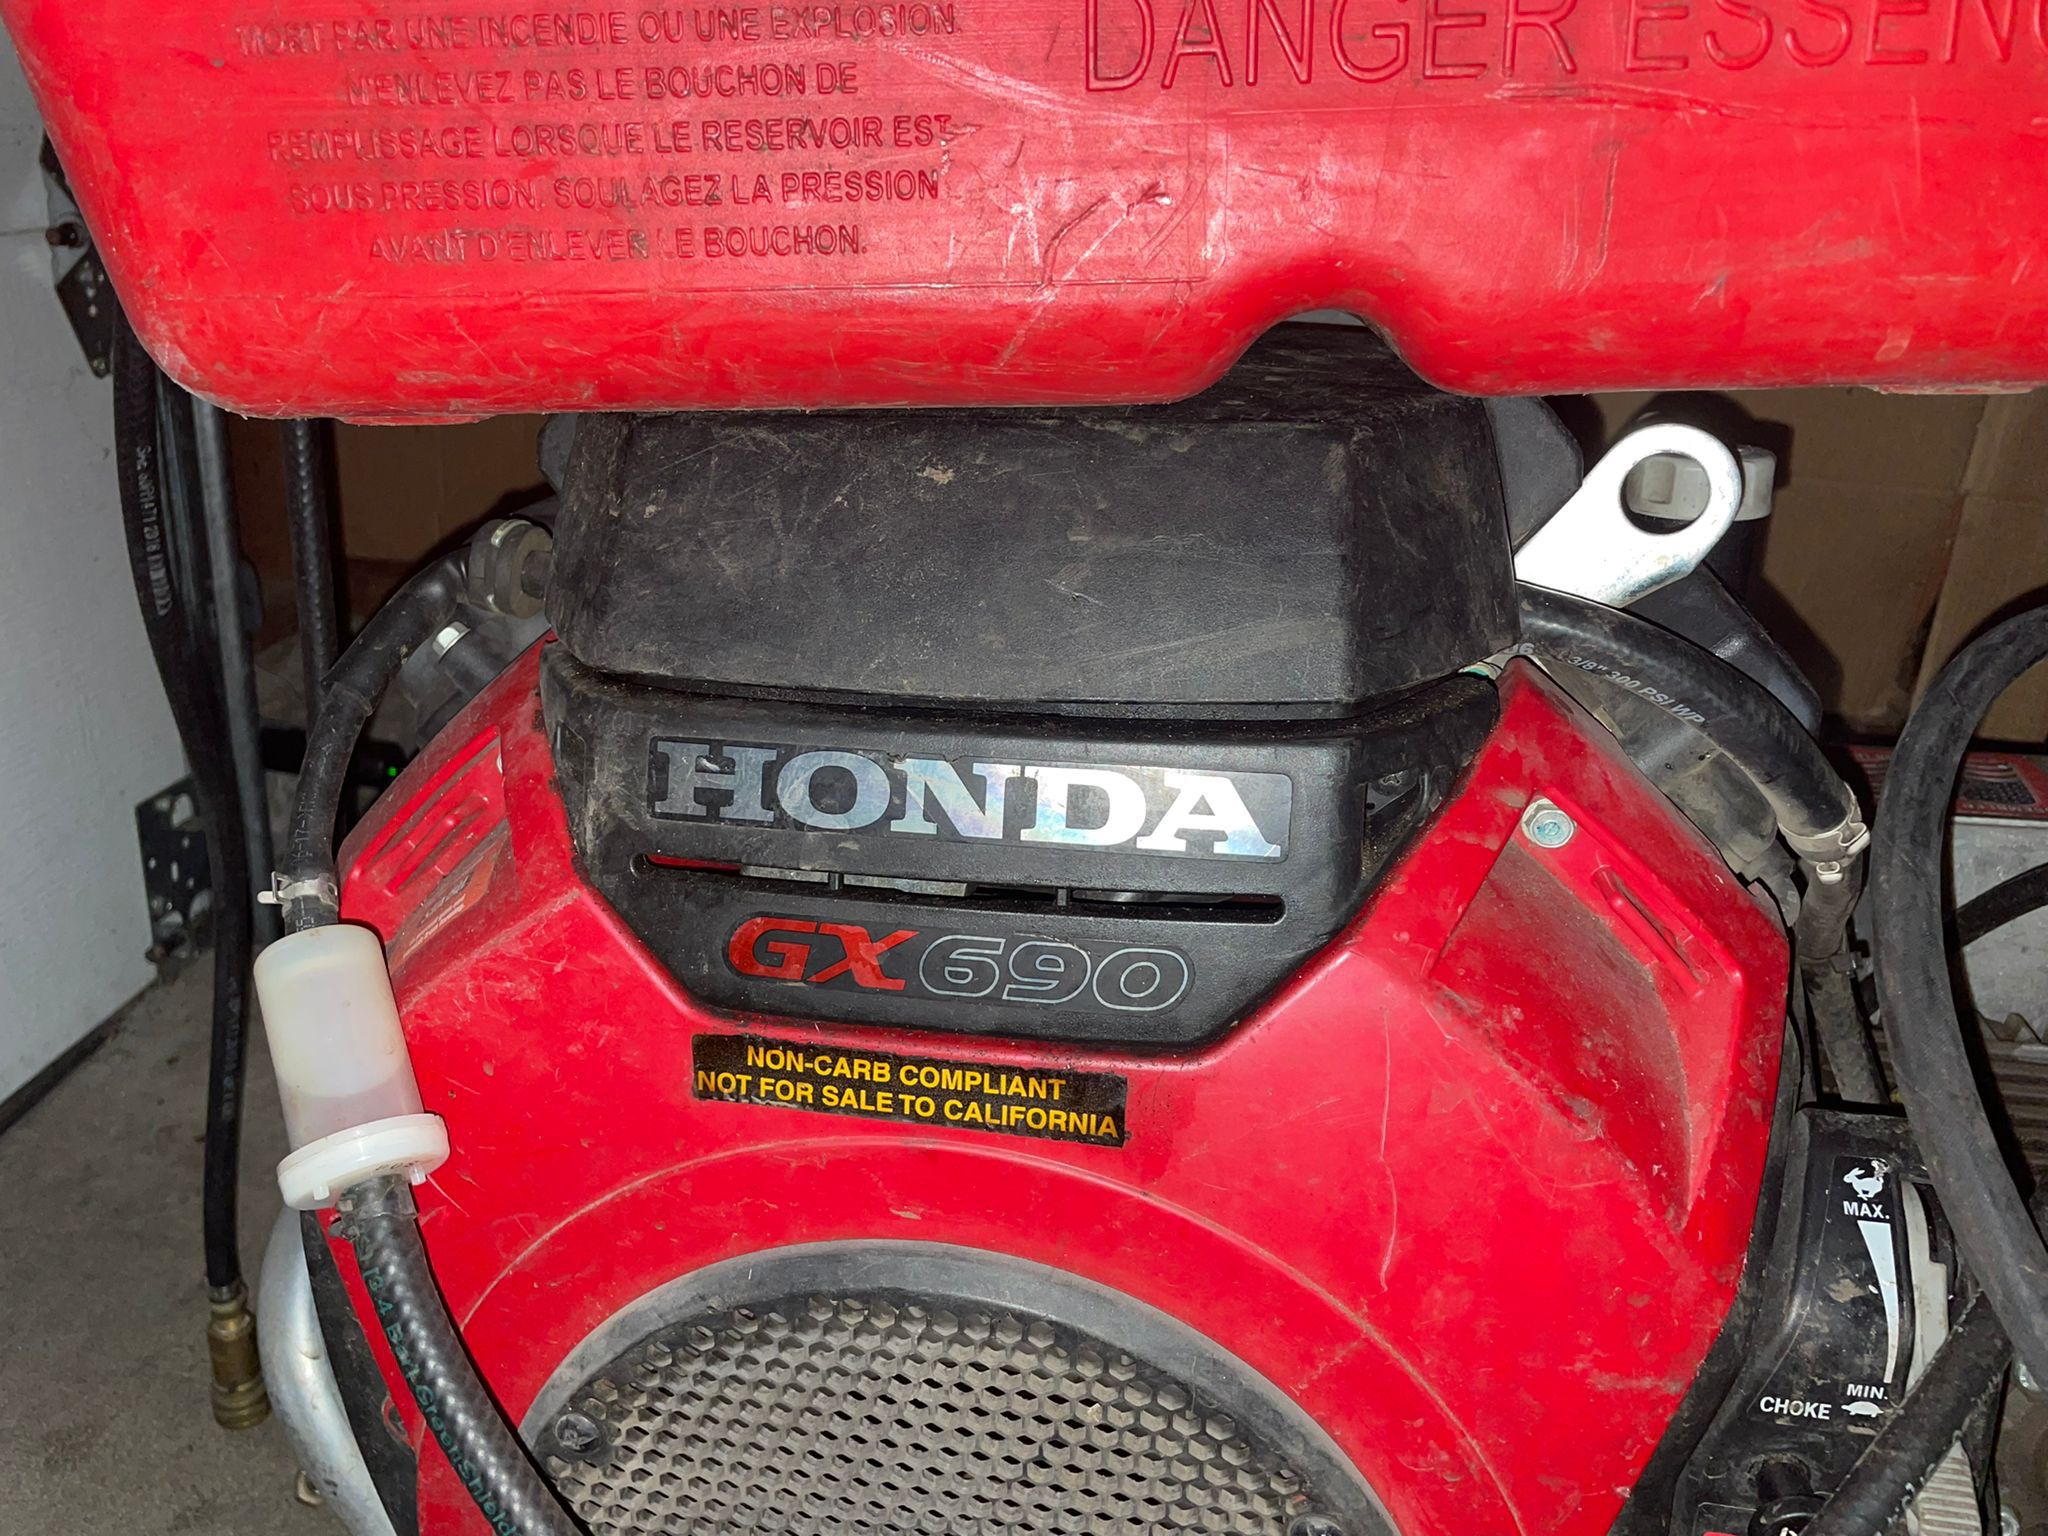 Honda GX 690, comes with 150 ft of pressure hoses, a gan and several accessories